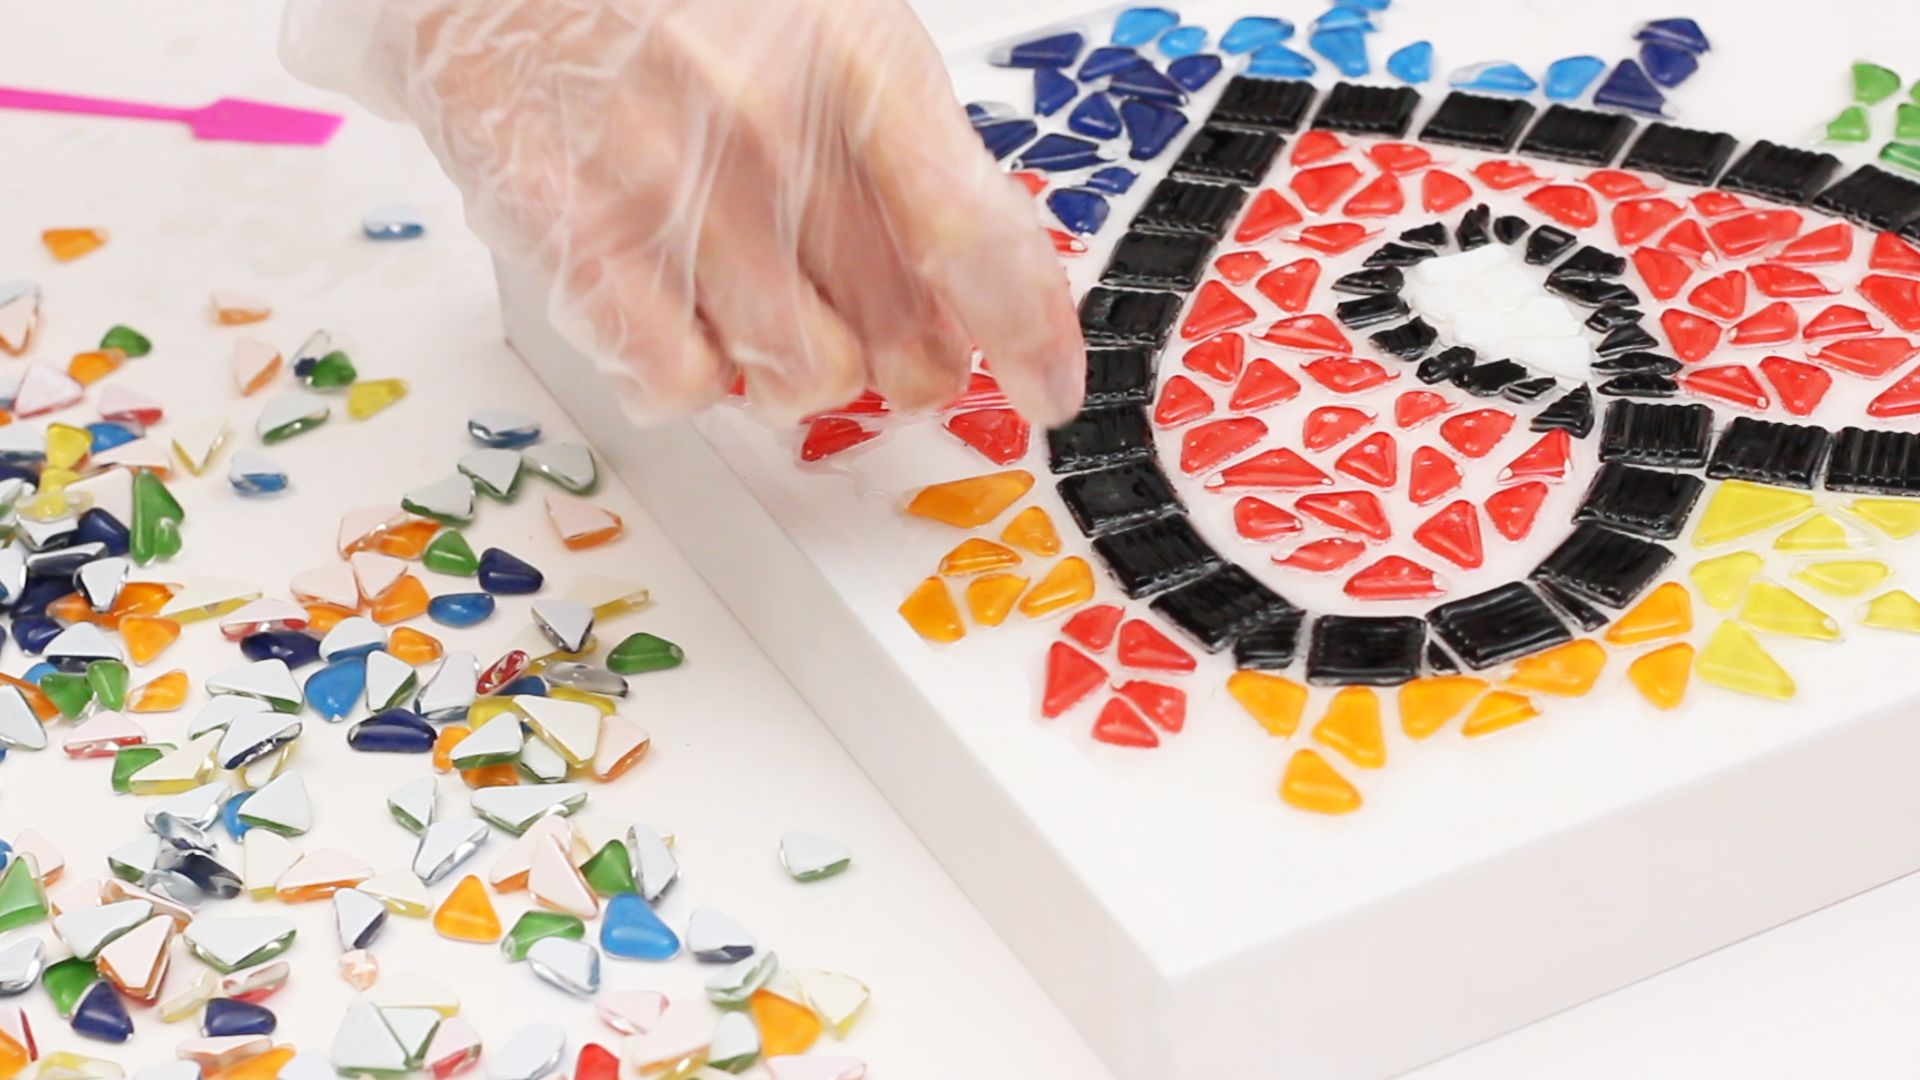 Resin Mosaic - mosaic is complete and all of your tiles